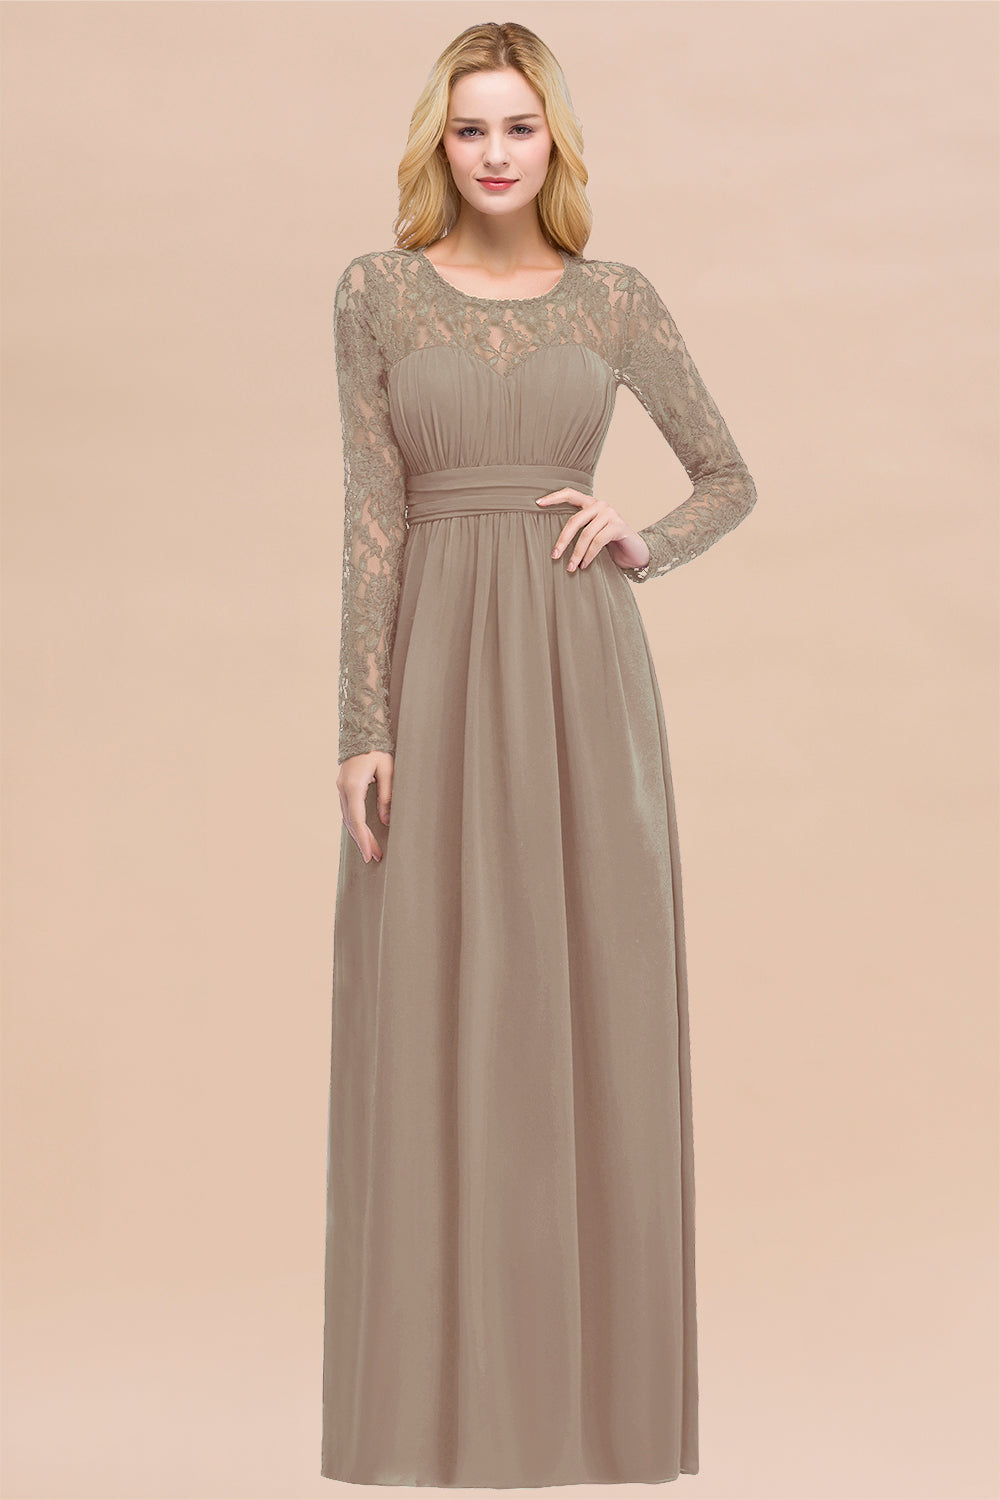 Load image into Gallery viewer, Elegant Lace Burgundy Bridesmaid Dresses Online with Long Sleeves-27dress
